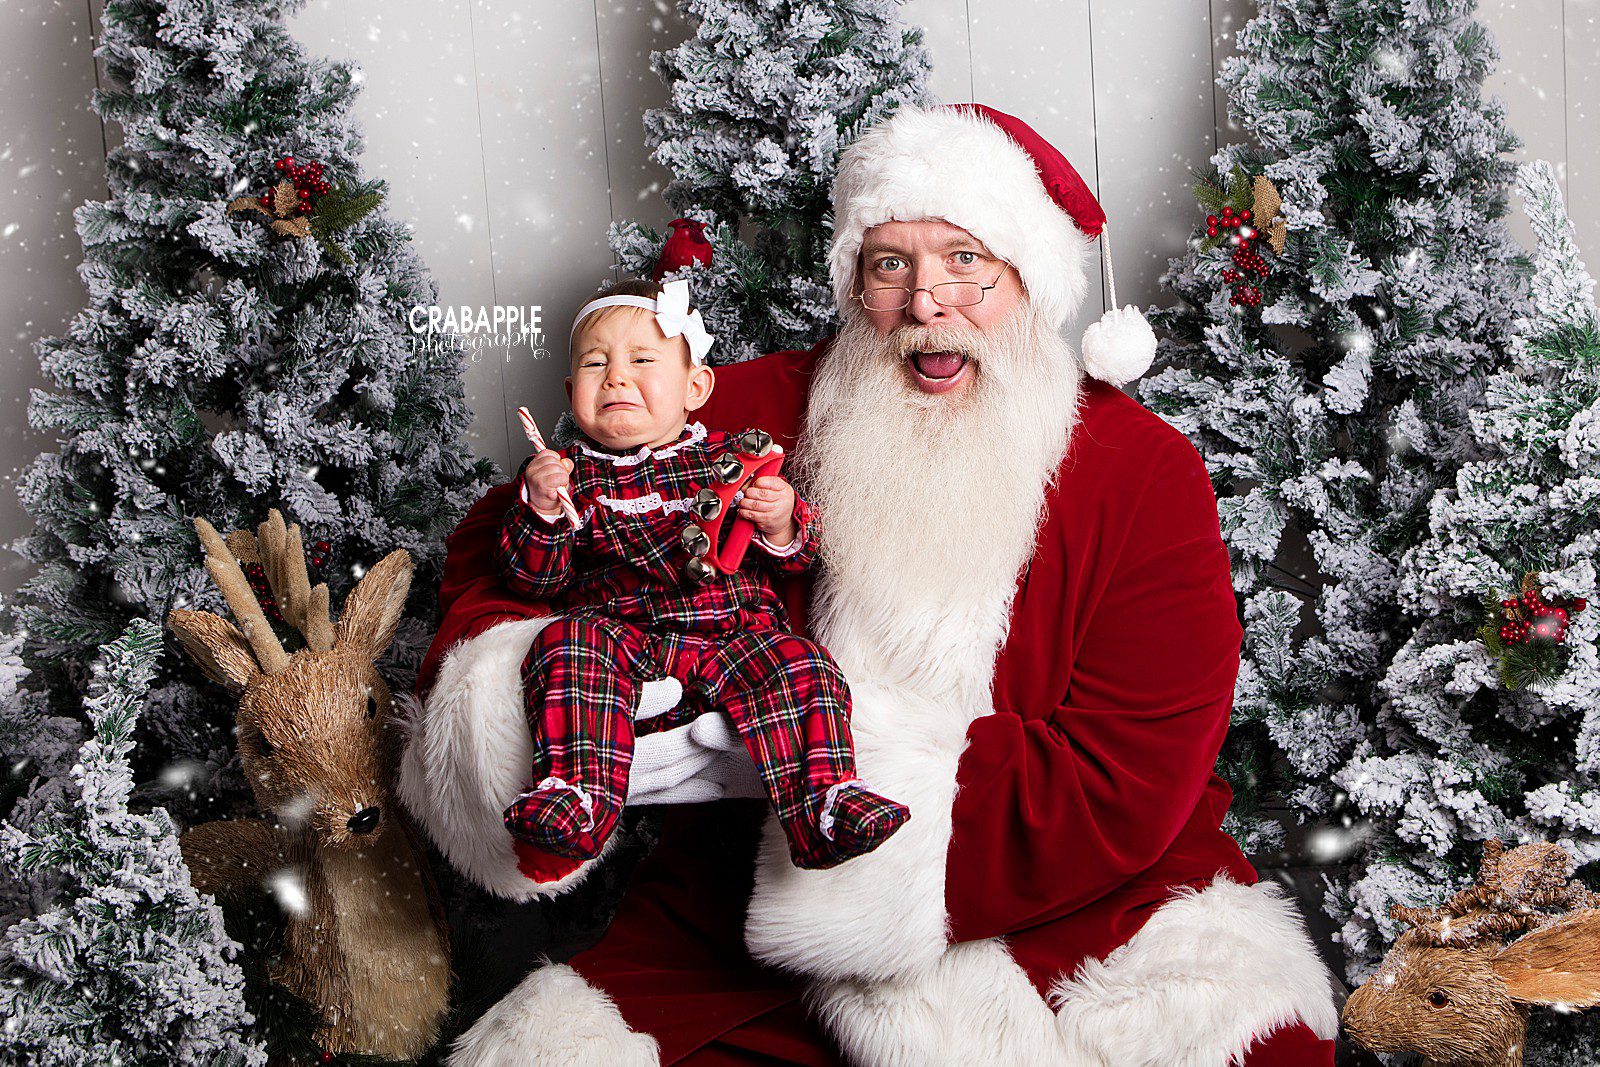 merrimack valley baby's first christmas photos with santa